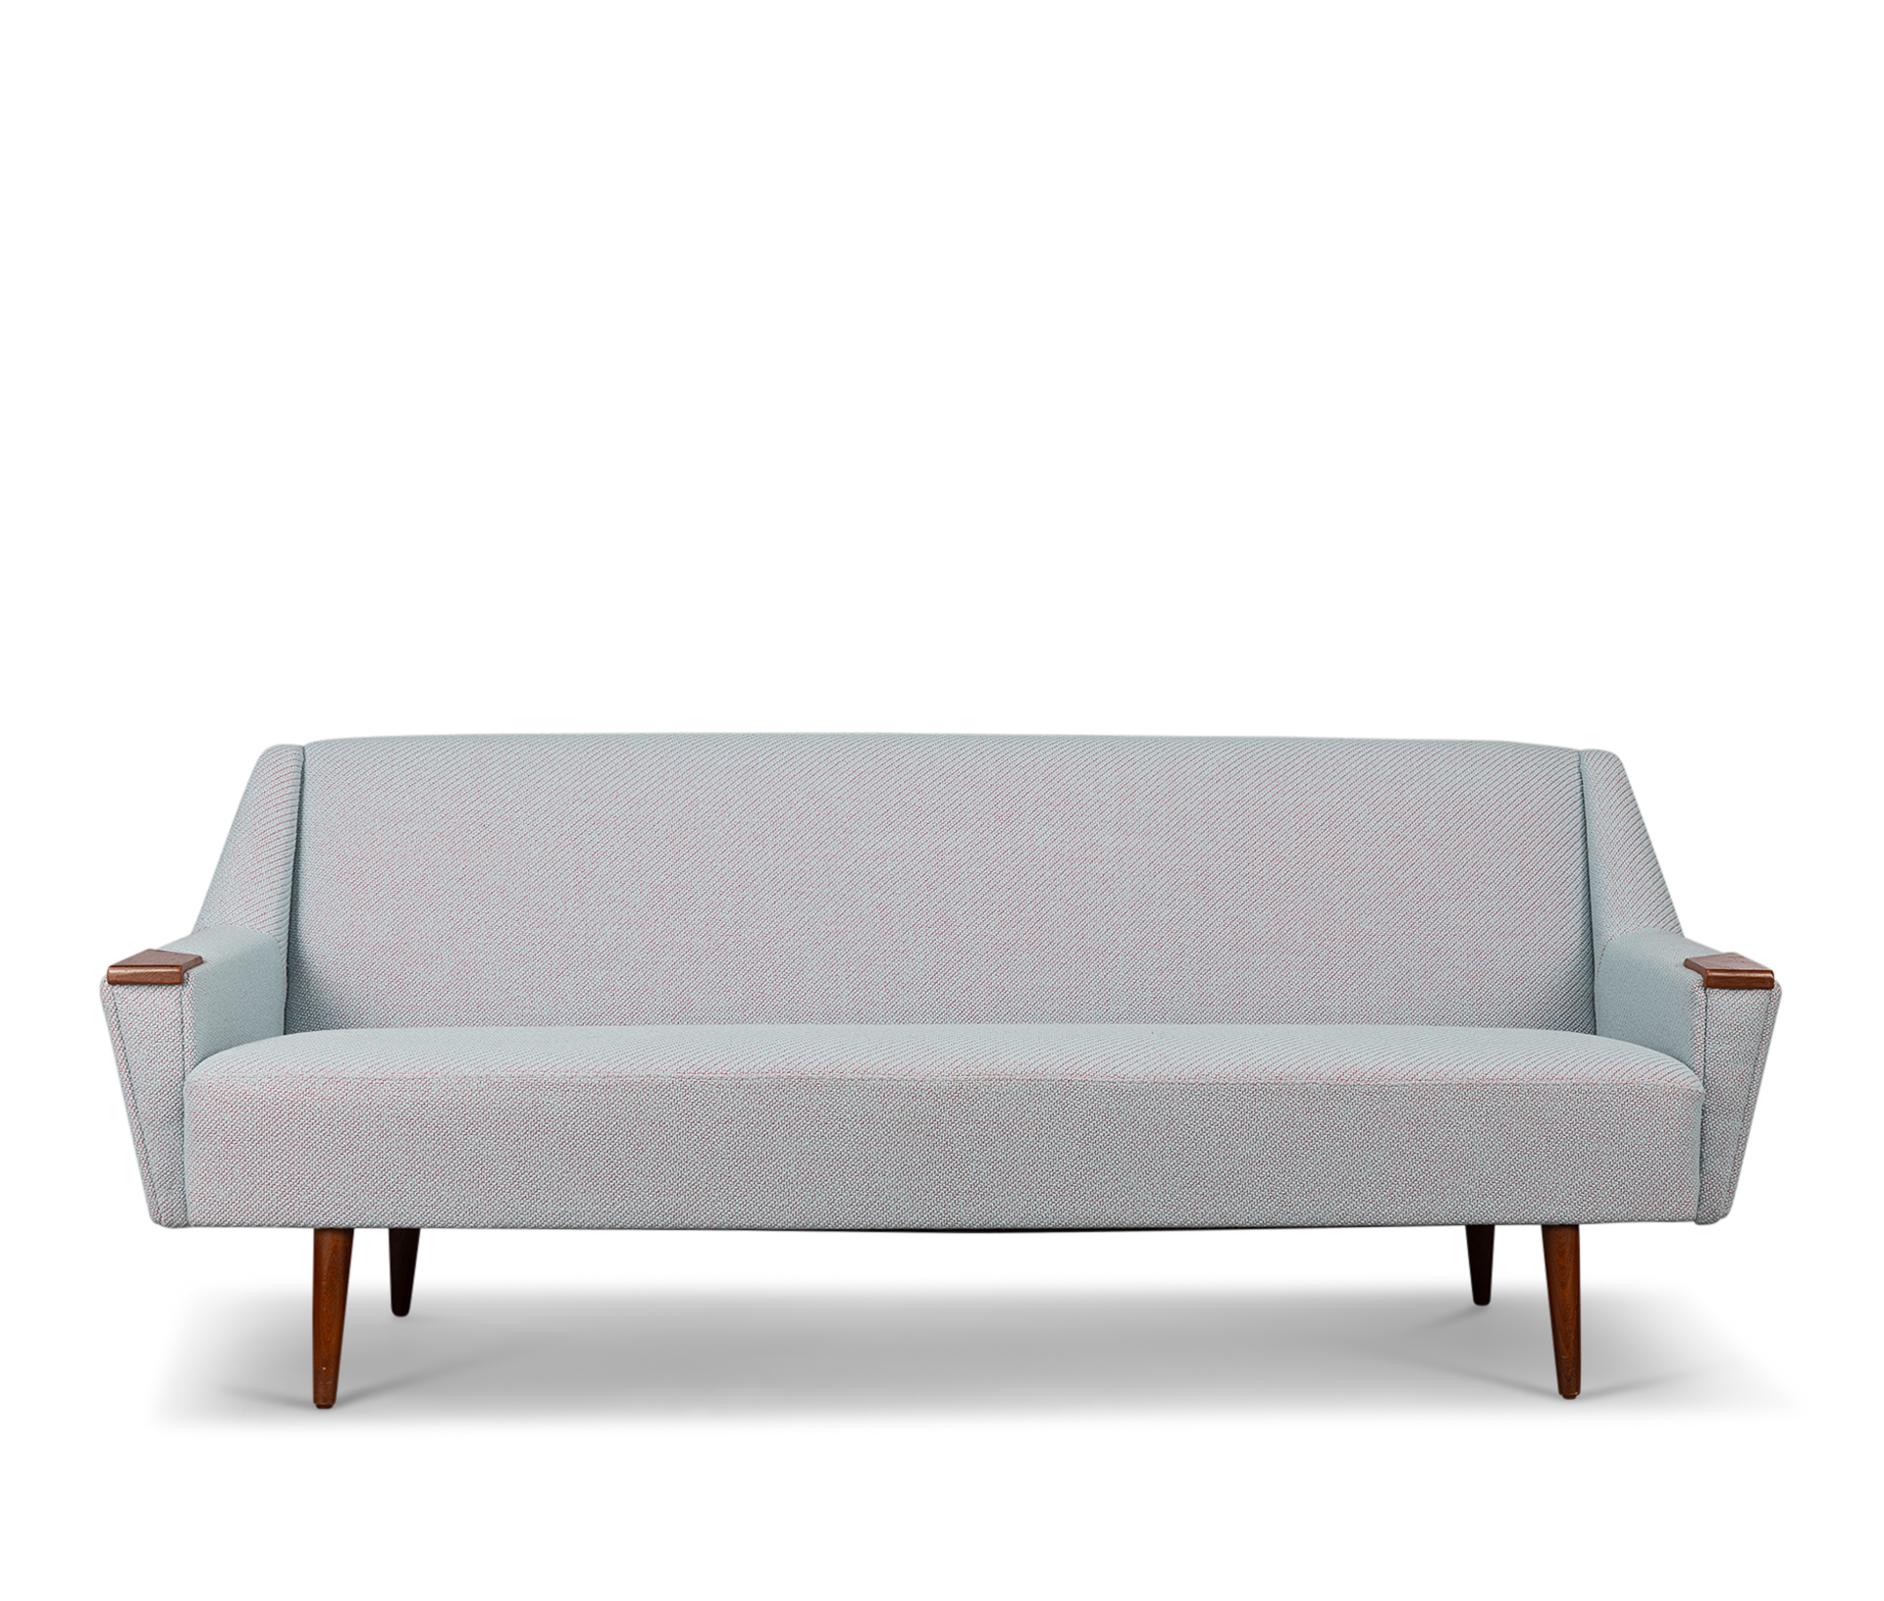 Vintage design sofa
Edgy Danish Design sofa made by Dux in stunning new upholstery. This sofa is reupholstered with Kvadrat Coda 2 no. 722. This sofa is reupholstered in full accordance with the original upholstery. This sofa has a spacious yet